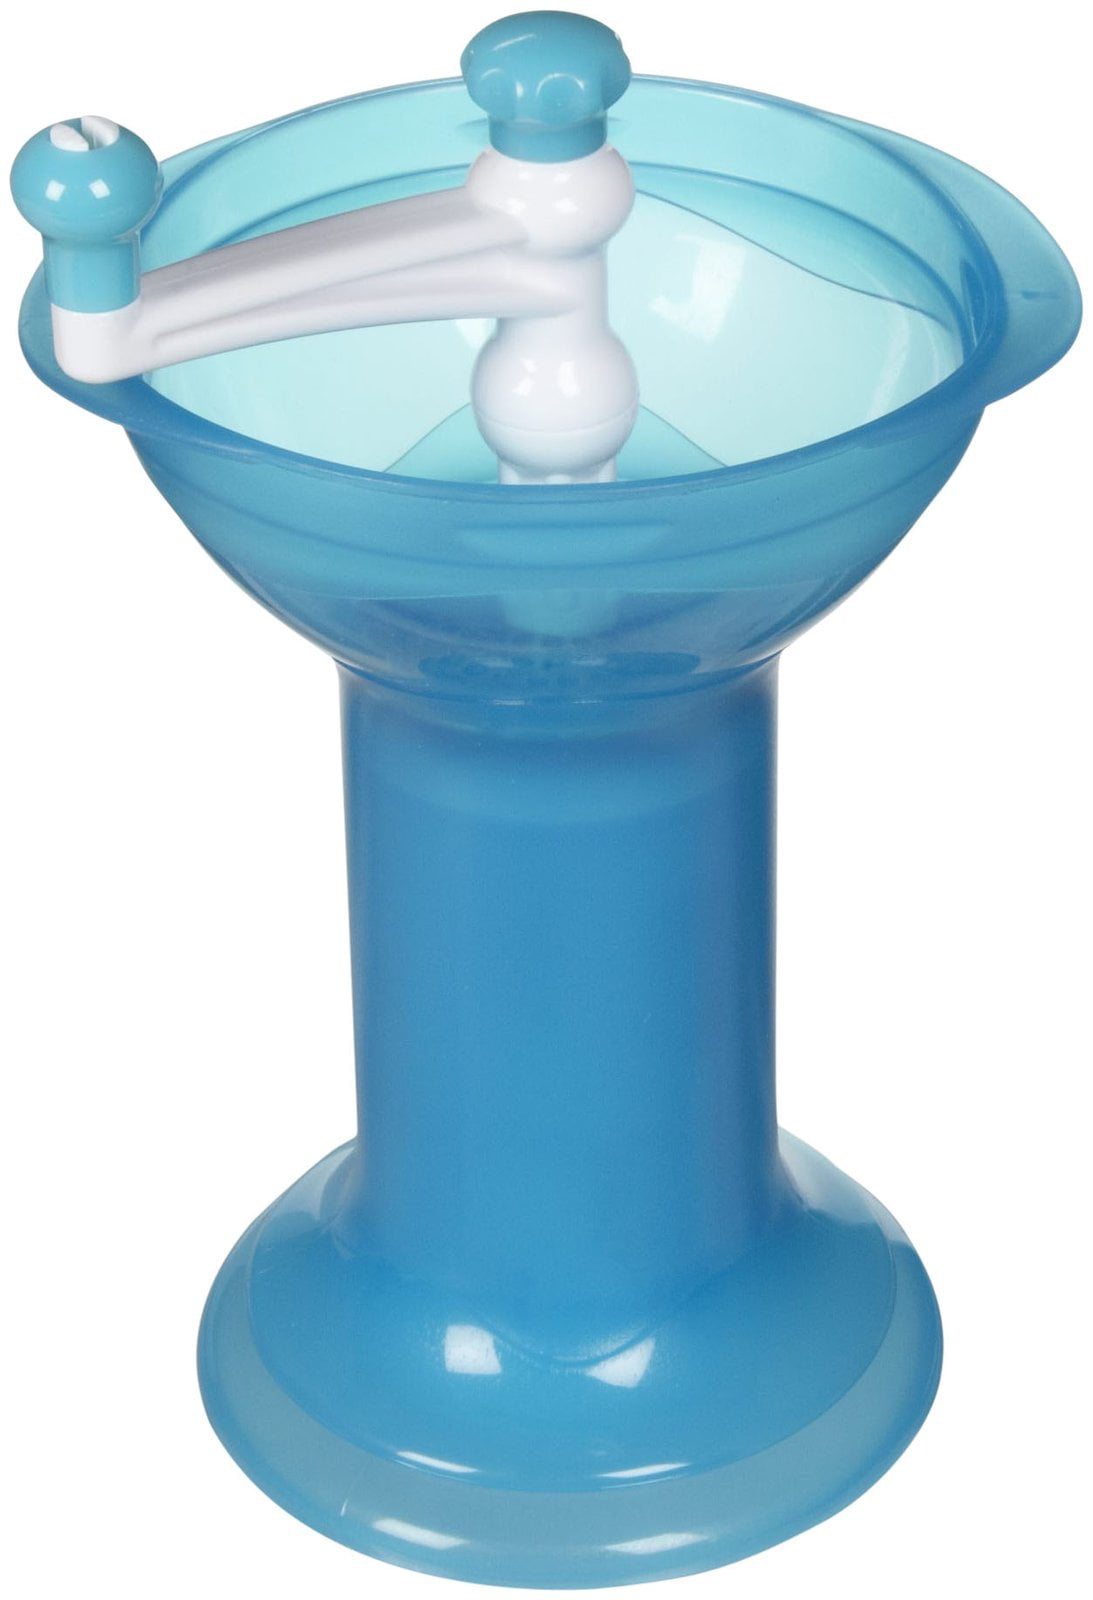 🌸 Rusch Baby Food Grinder . Price: $99.00 . Rusch Baby Food